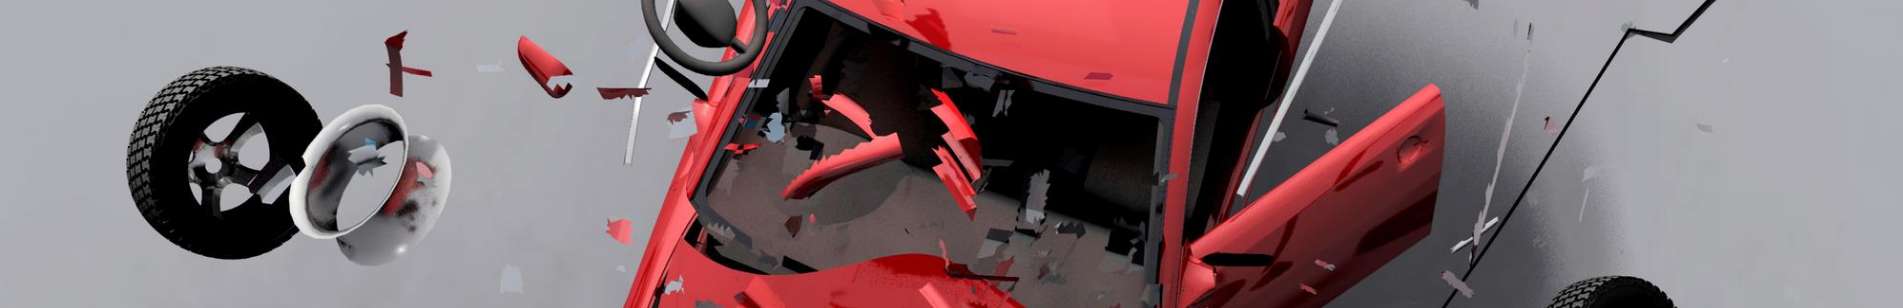 Red car smashing into pieces upon impact.